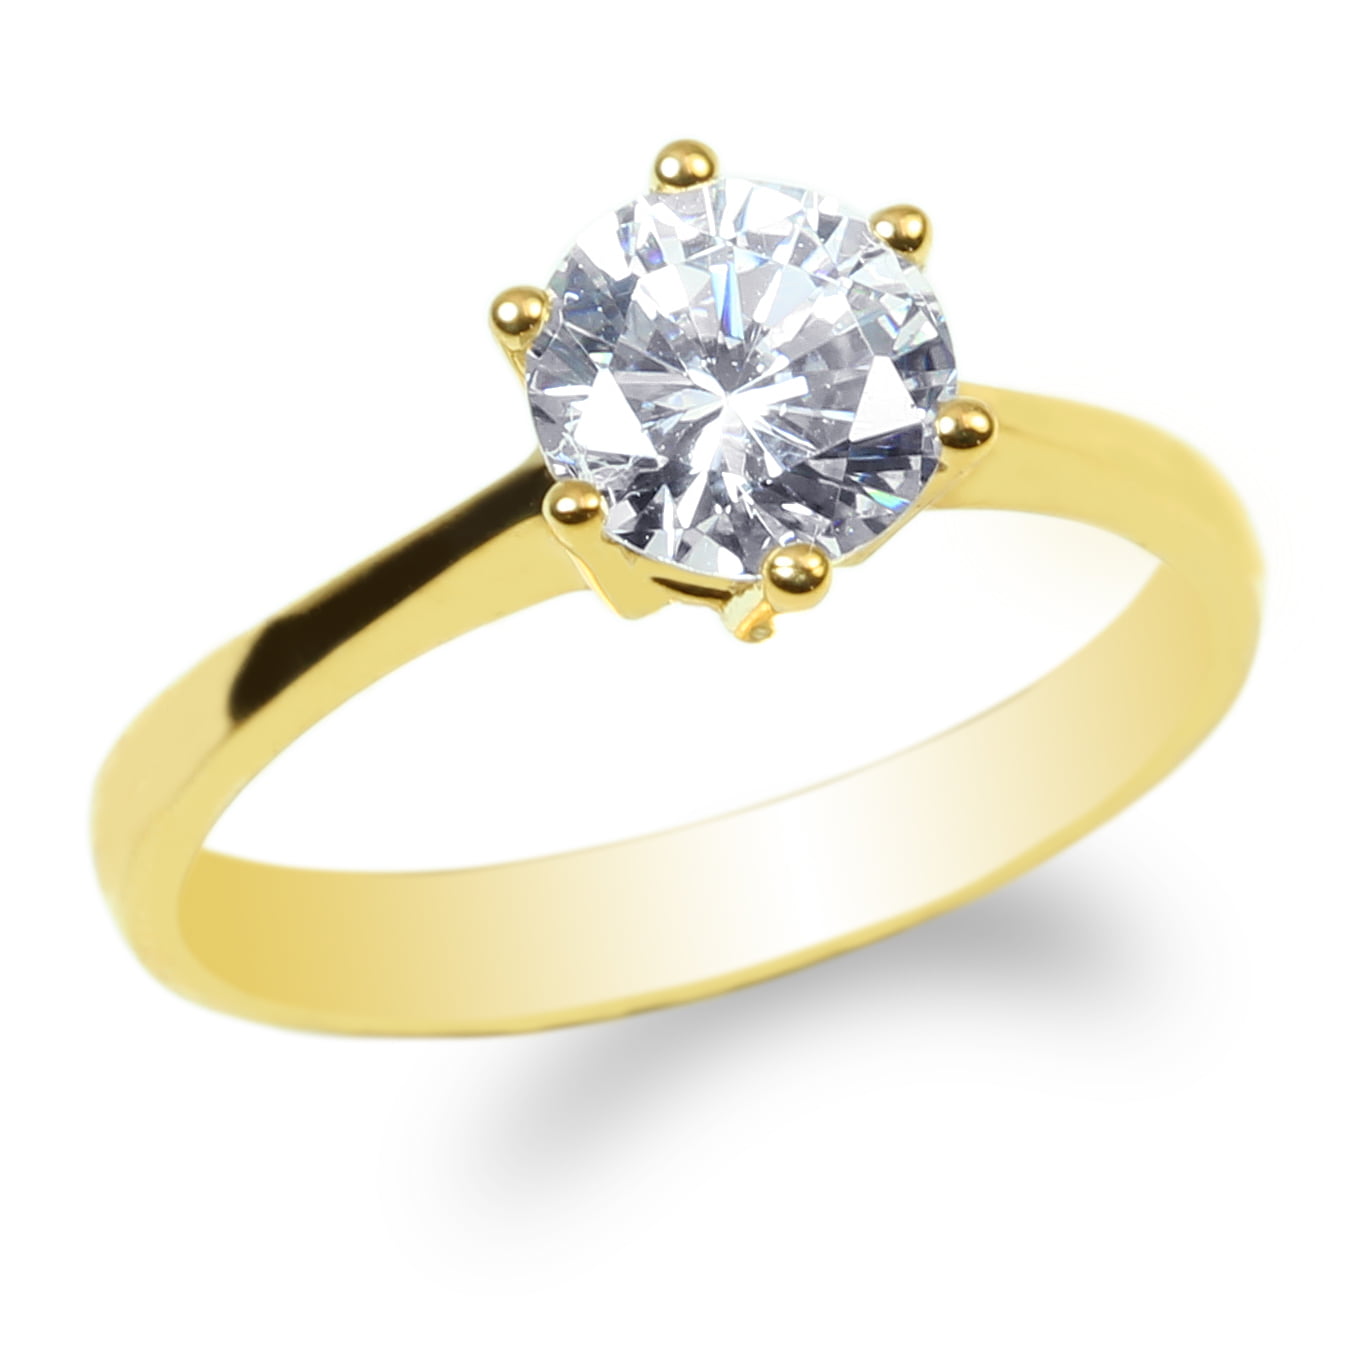 JamesJenny 10K Yellow Gold  0.28 ct Round CZ Solid Solitaire Ring Size 4-8